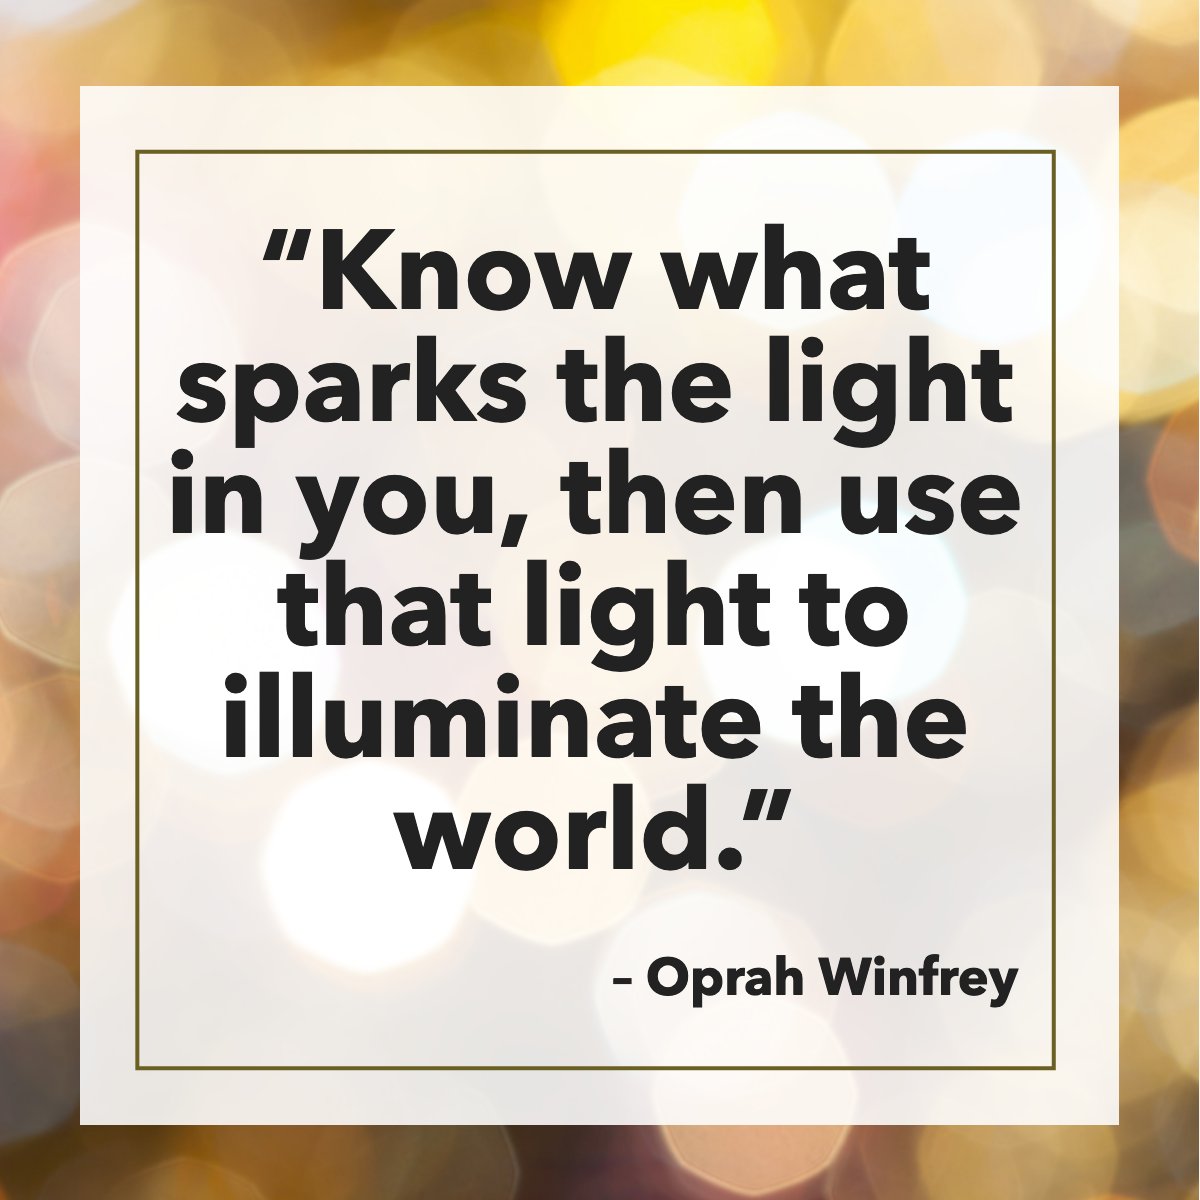 It's always important to know the things that make you feel better #quotegram #quoteoftheday✏️ #oprahwinfrey #dreams💭 #RacingRealEstateAgent #BarrettRealEstate #StoneTreeRealEstateTeam #maricopaazrealestate #racingagent #arizonarealestate